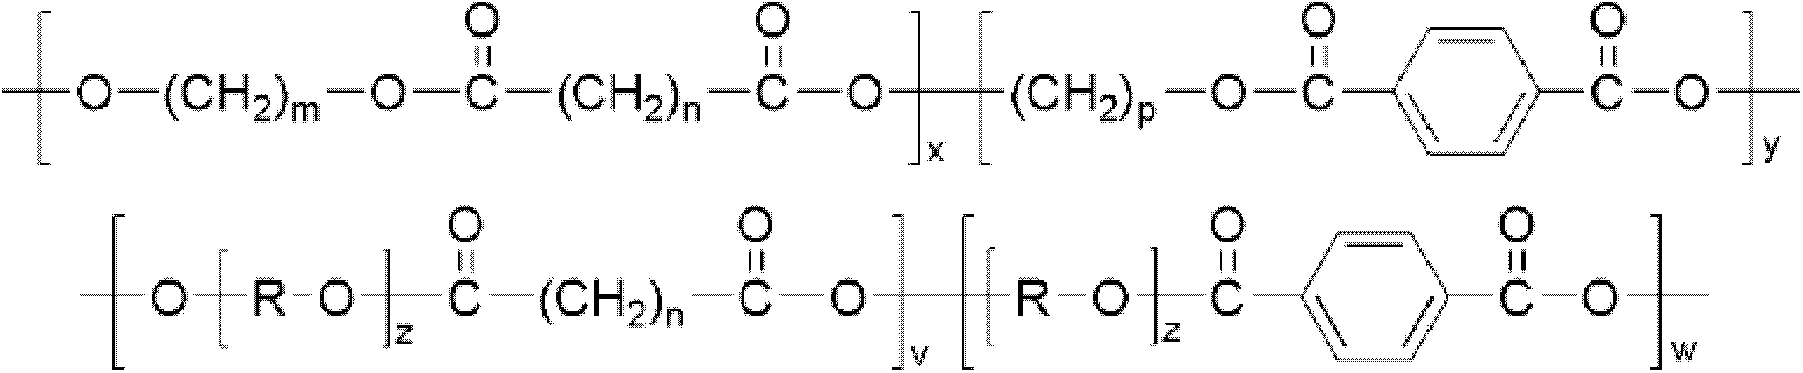 Composition for preparing expandable polypropylene carbonate and expandable polypropylene carbonate prepared therefrom